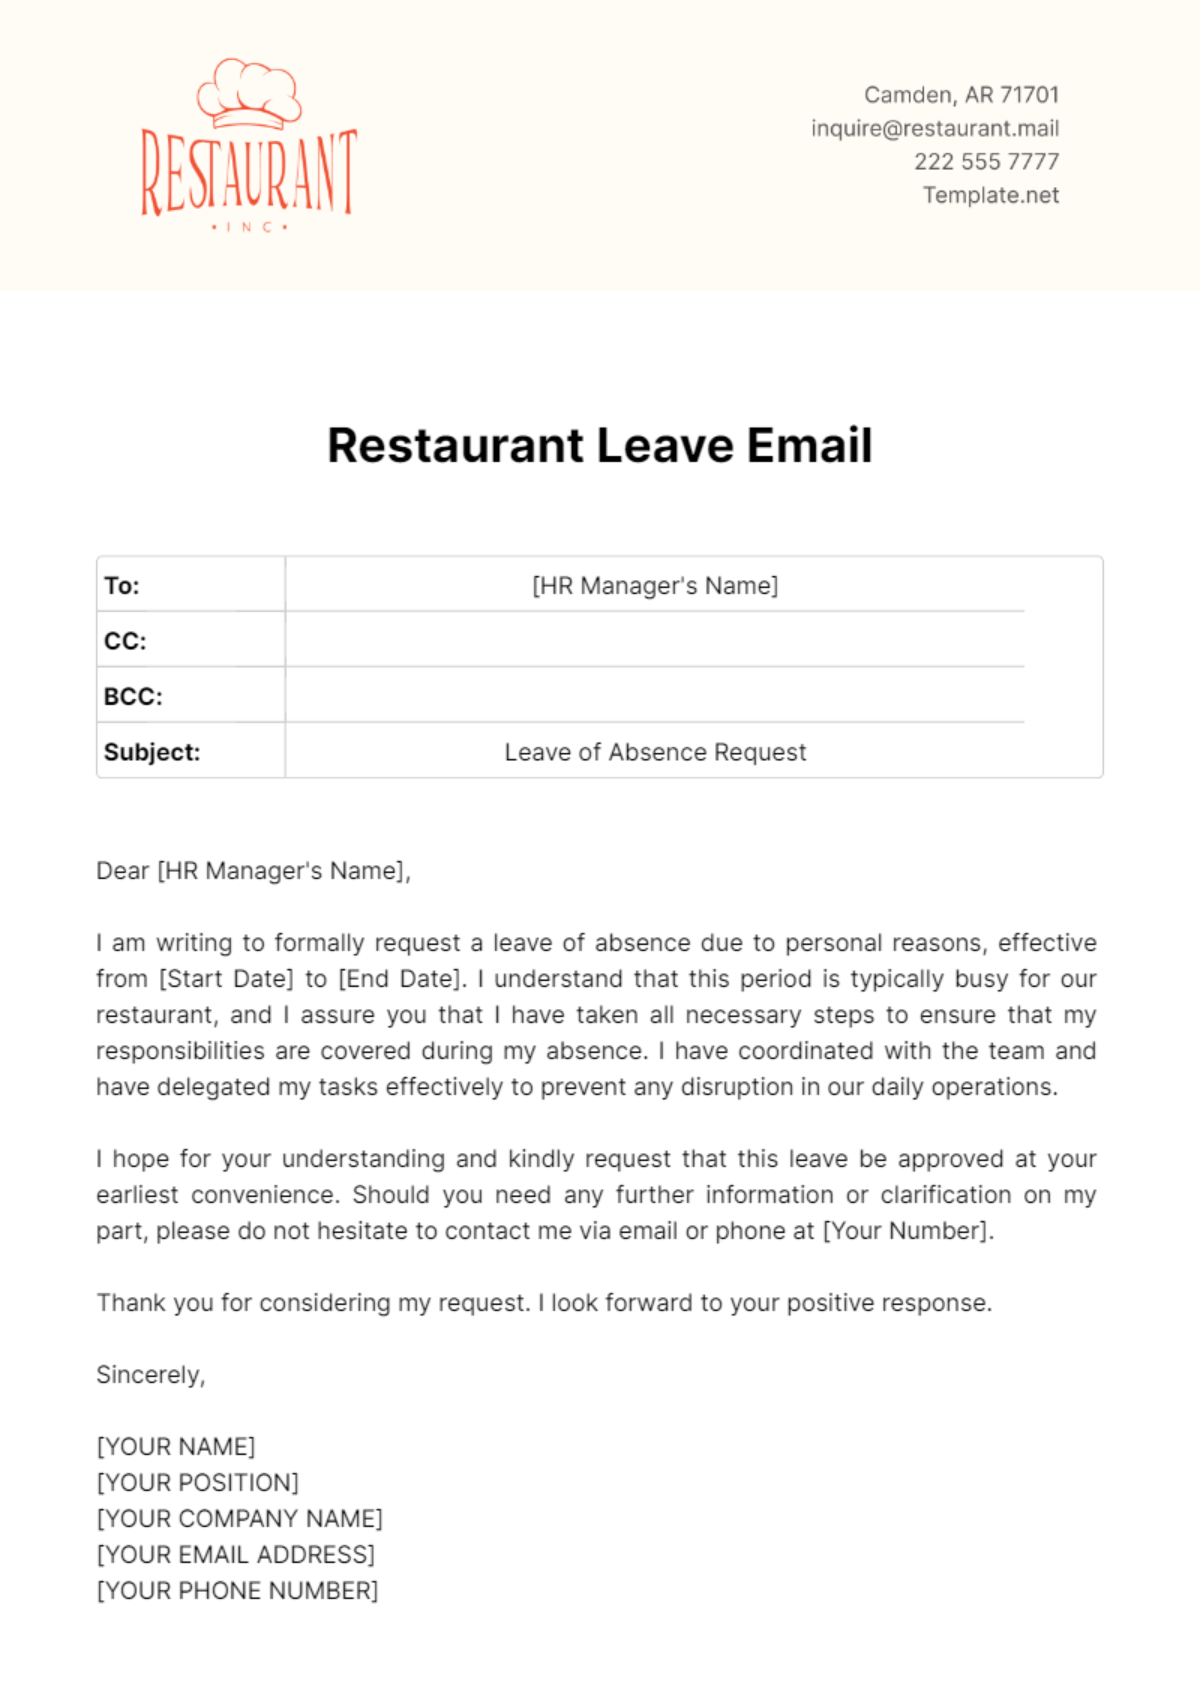 Free Restaurant Leave Email Template